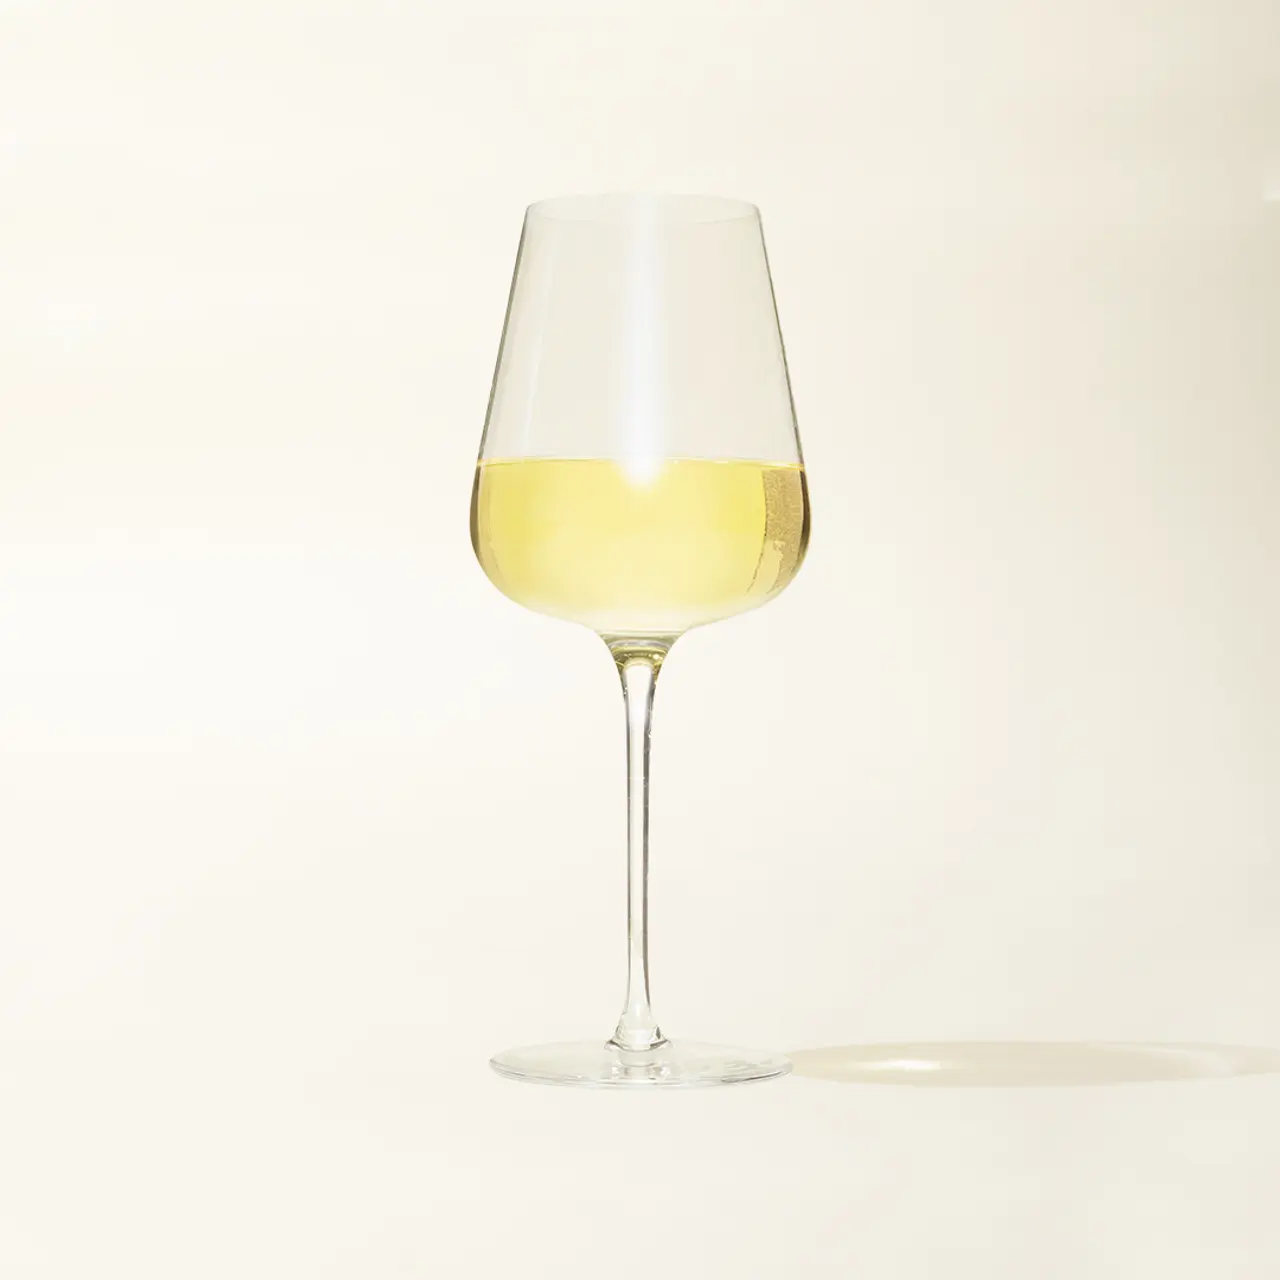 A wine glass half-filled with white wine stands against a neutral background.